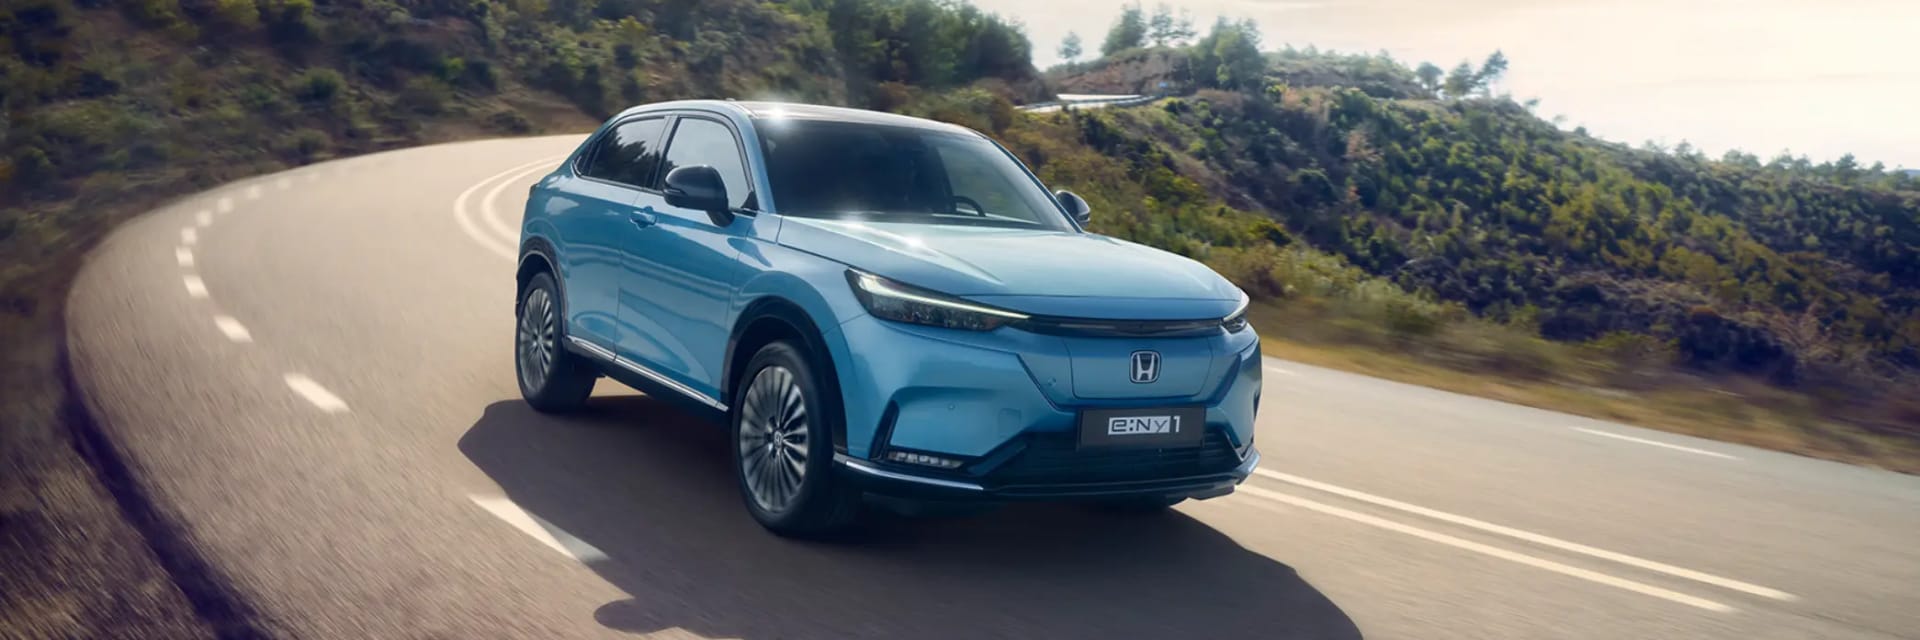 Honda e:Ny1 Personal Contract Purchase Offer